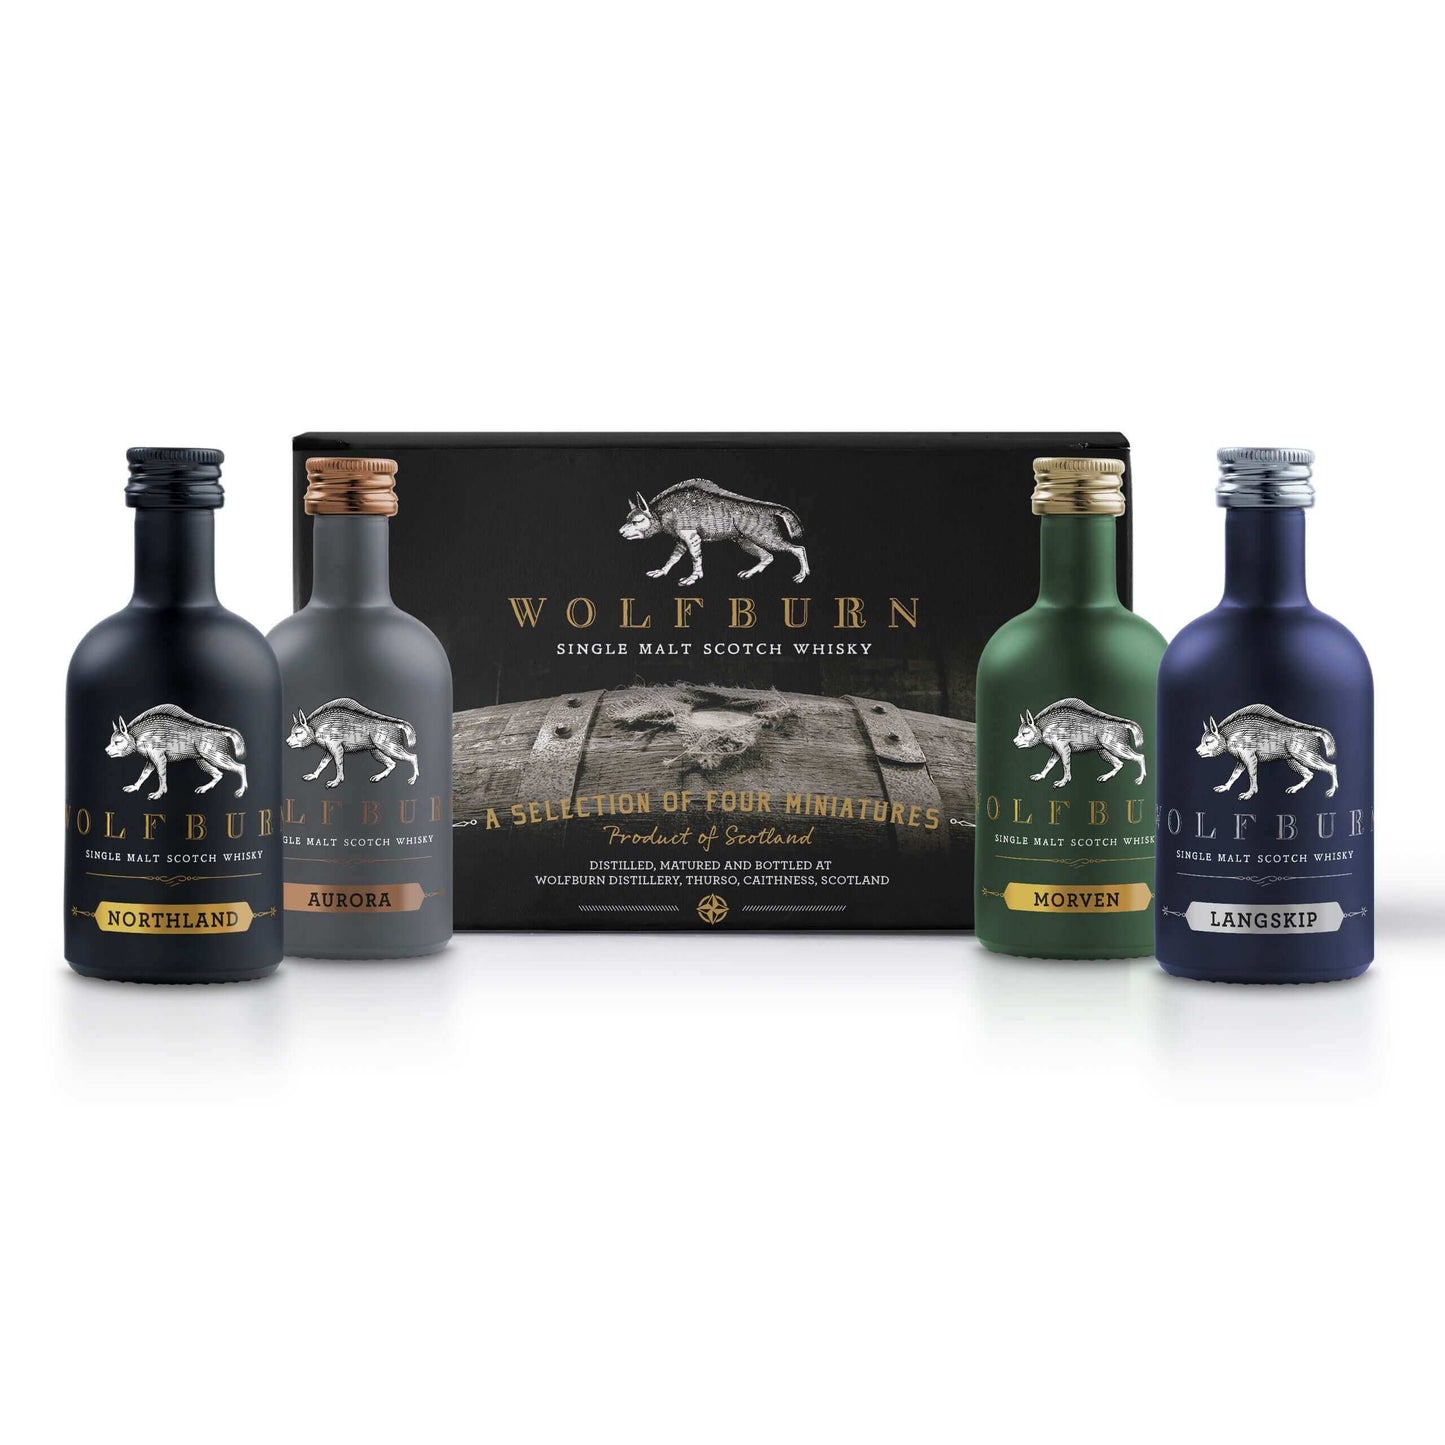 Wolfburn Distillery Miniature Whisky Quad Pack These four conveniently-sized 5cl bottles are a perfect gift for someone special. Or for yourself as a tasting treat, featuring the four core expressions of Wolfburn. £160.00